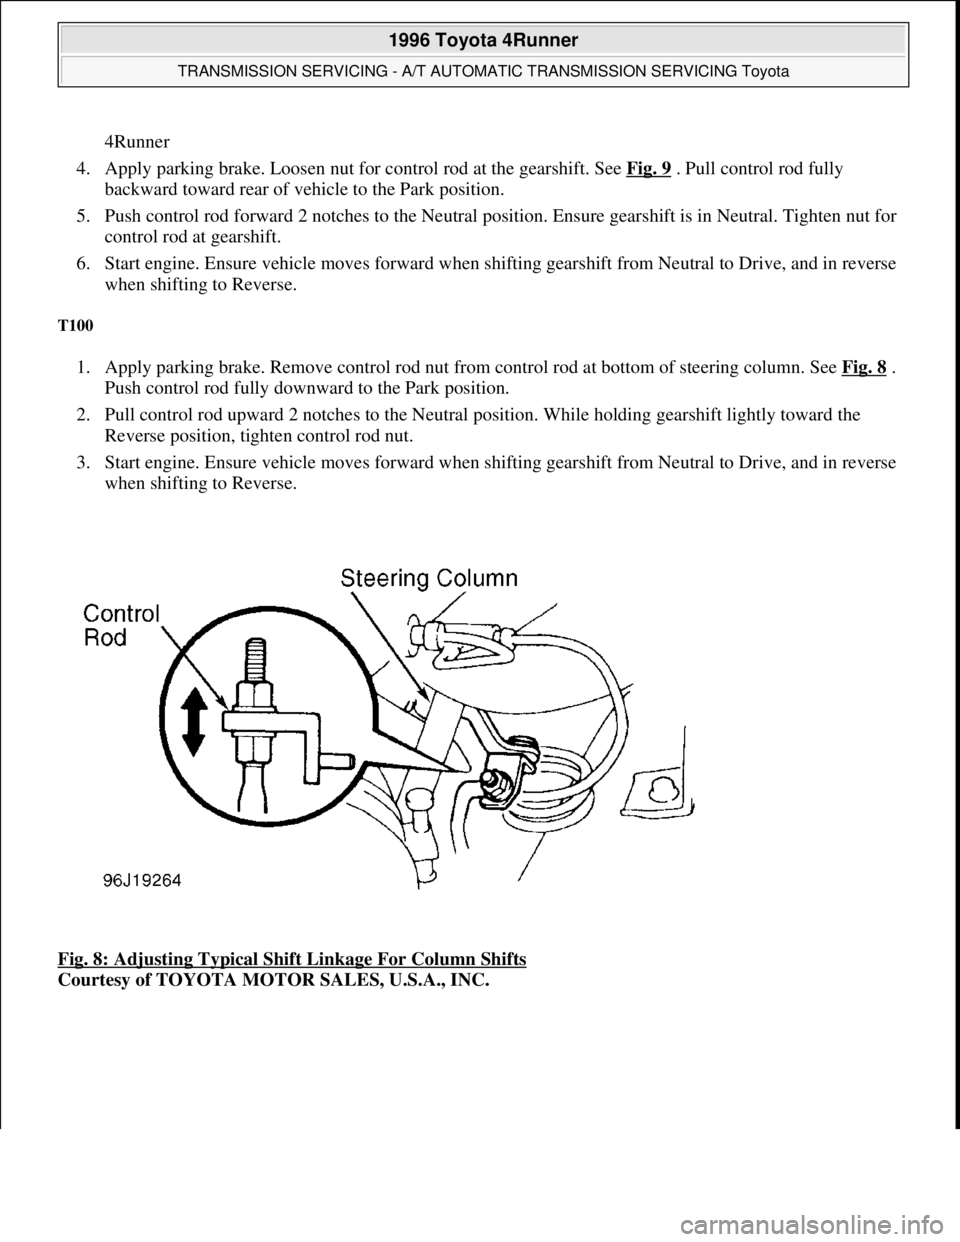 TOYOTA RAV4 1996  Service Repair Manual 4Runner  
4. Apply parking brake. Loosen nut for control rod at the gearshift. See Fig. 9
 . Pull control rod fully 
backward toward rear of vehicle to the Park position.  
5. Push control rod forward